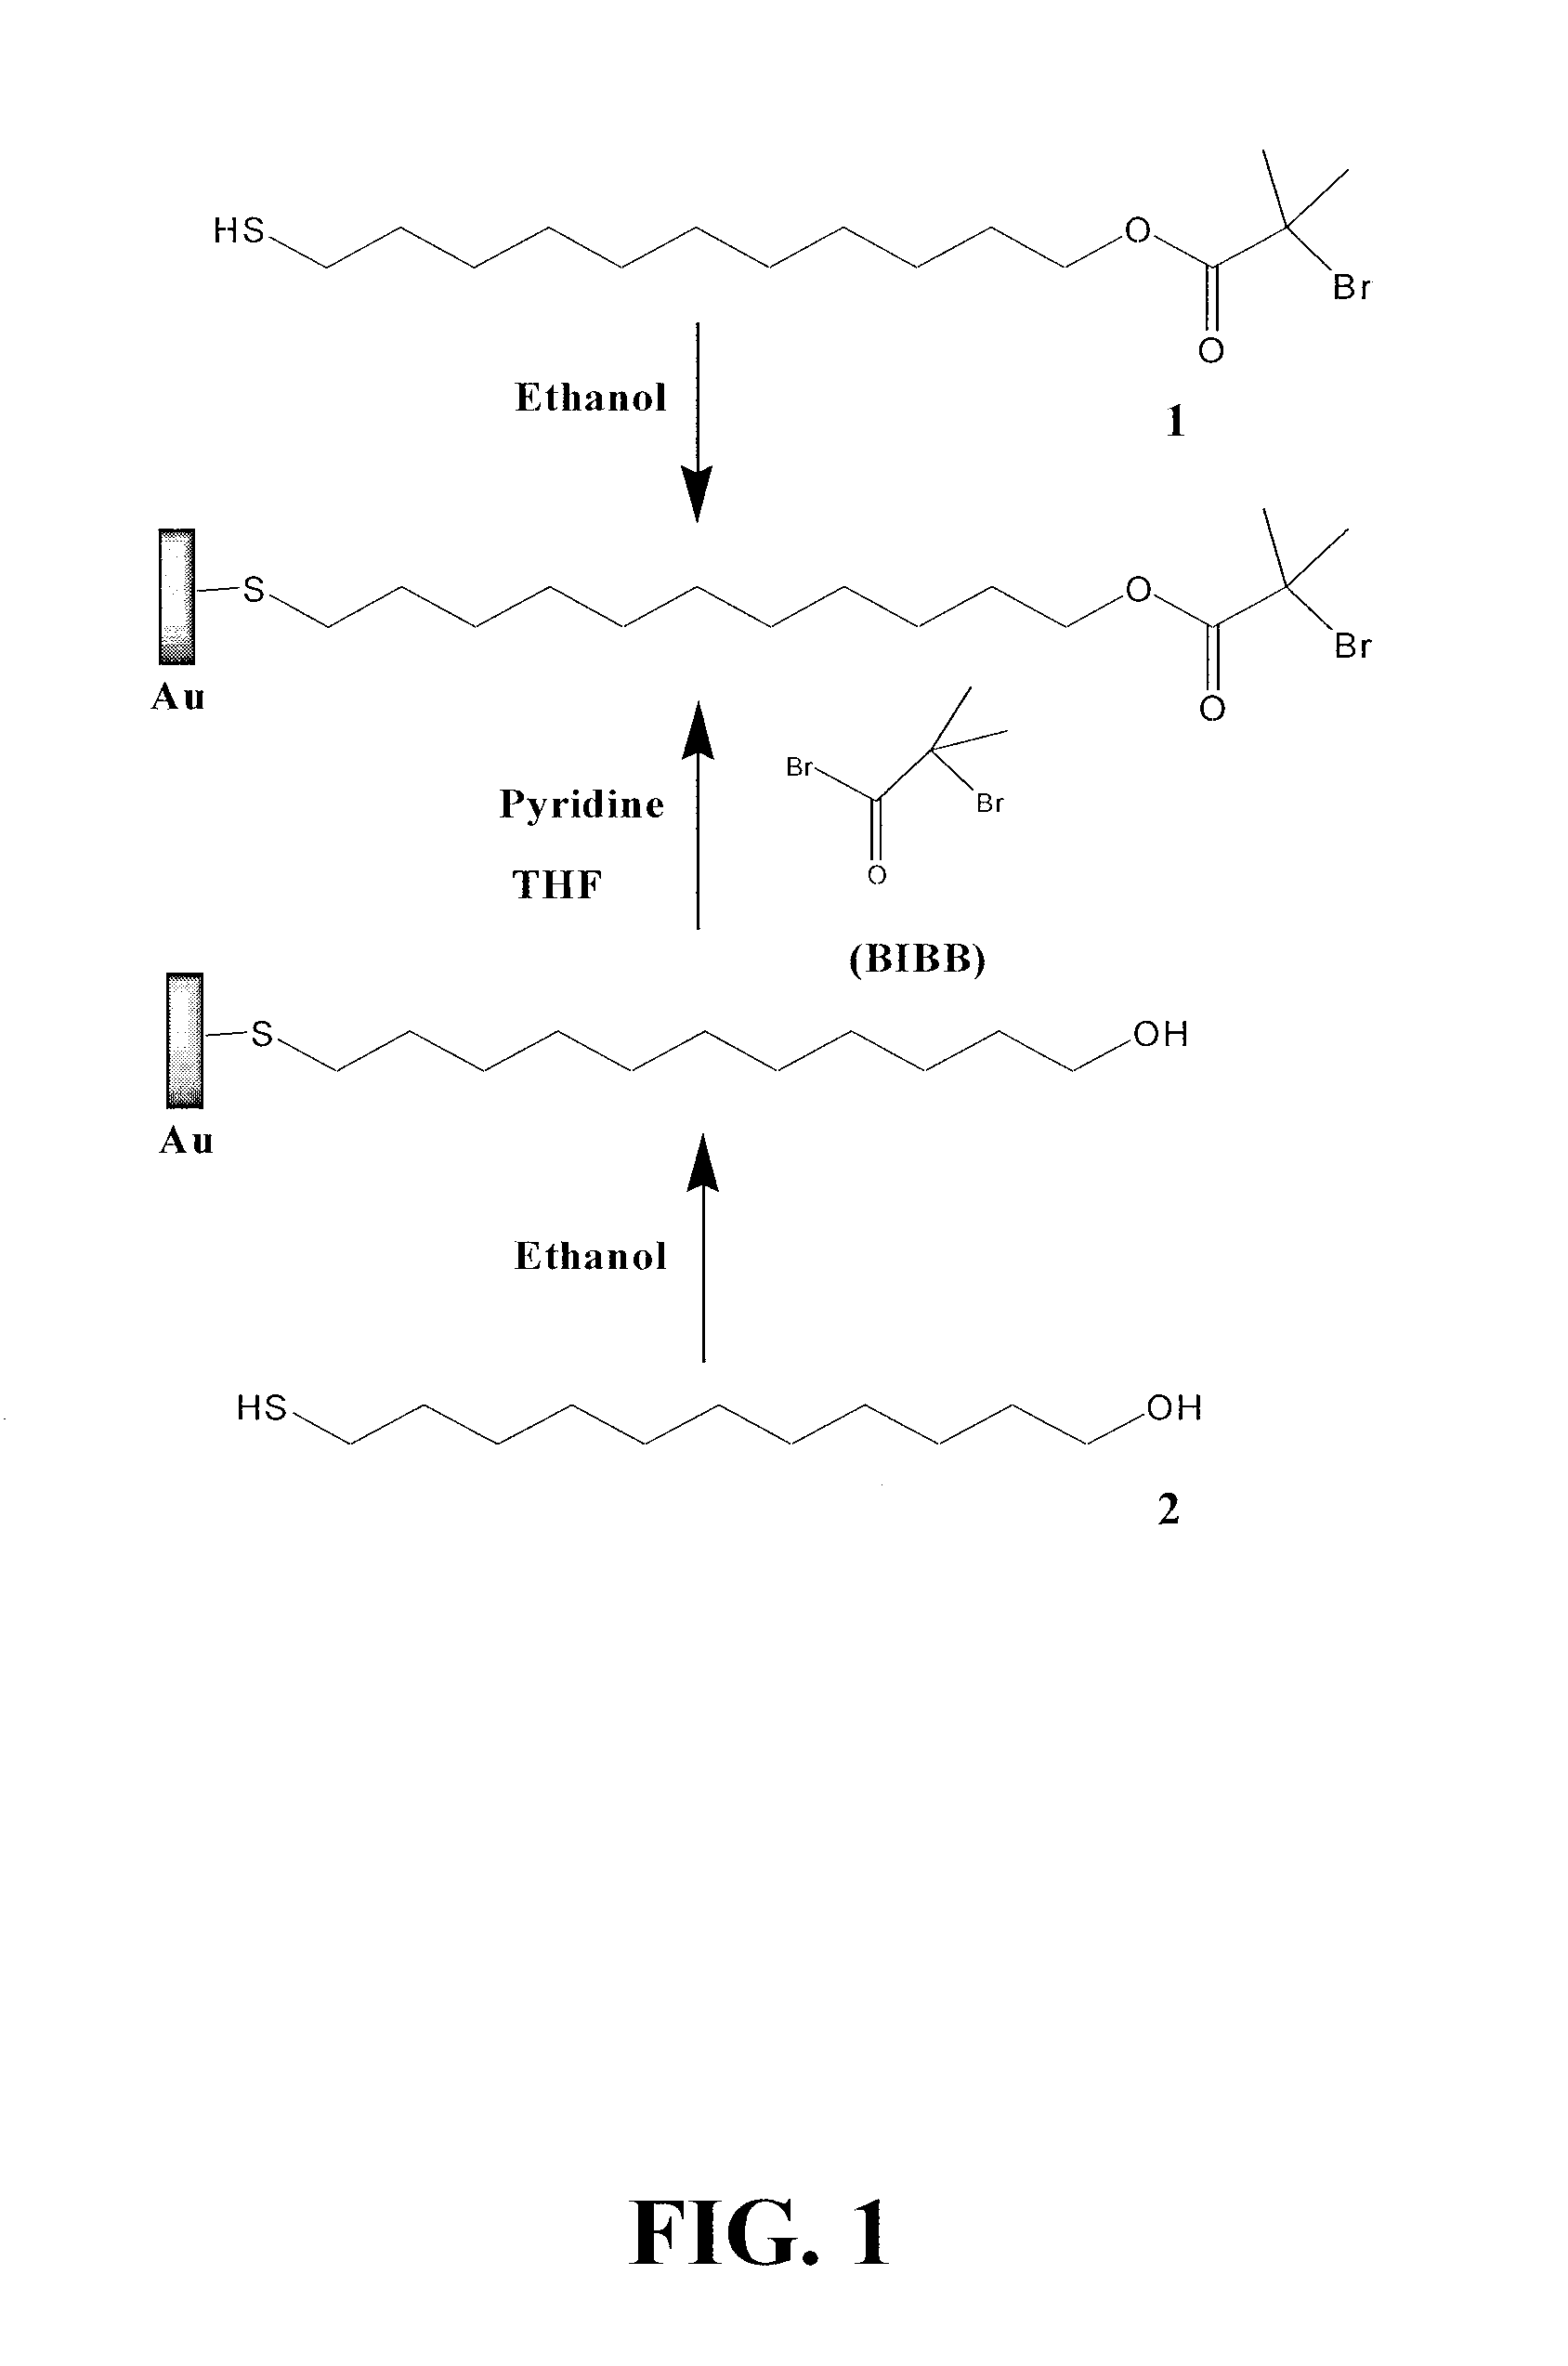 Super-low fouling sulfobetaine and carboxybetaine materials and related methods